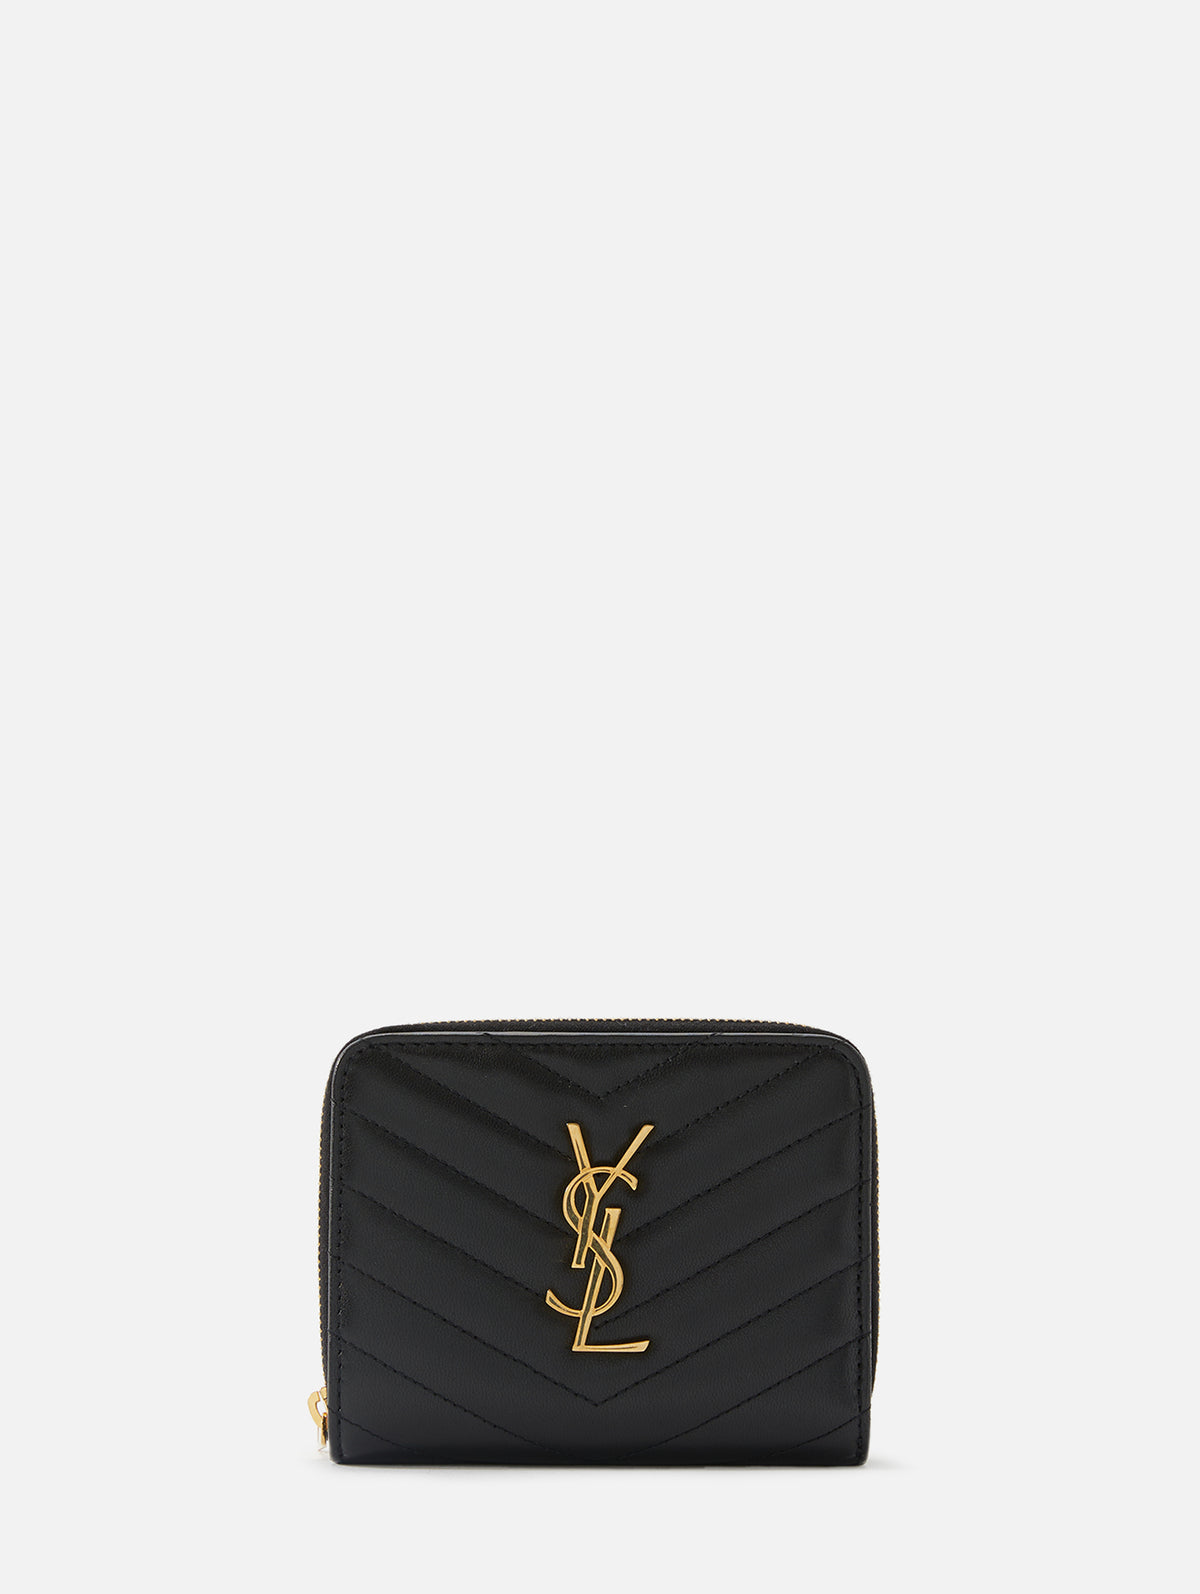 YSL Bill pouch  Luxury purses, Purses and bags, Cute wallets